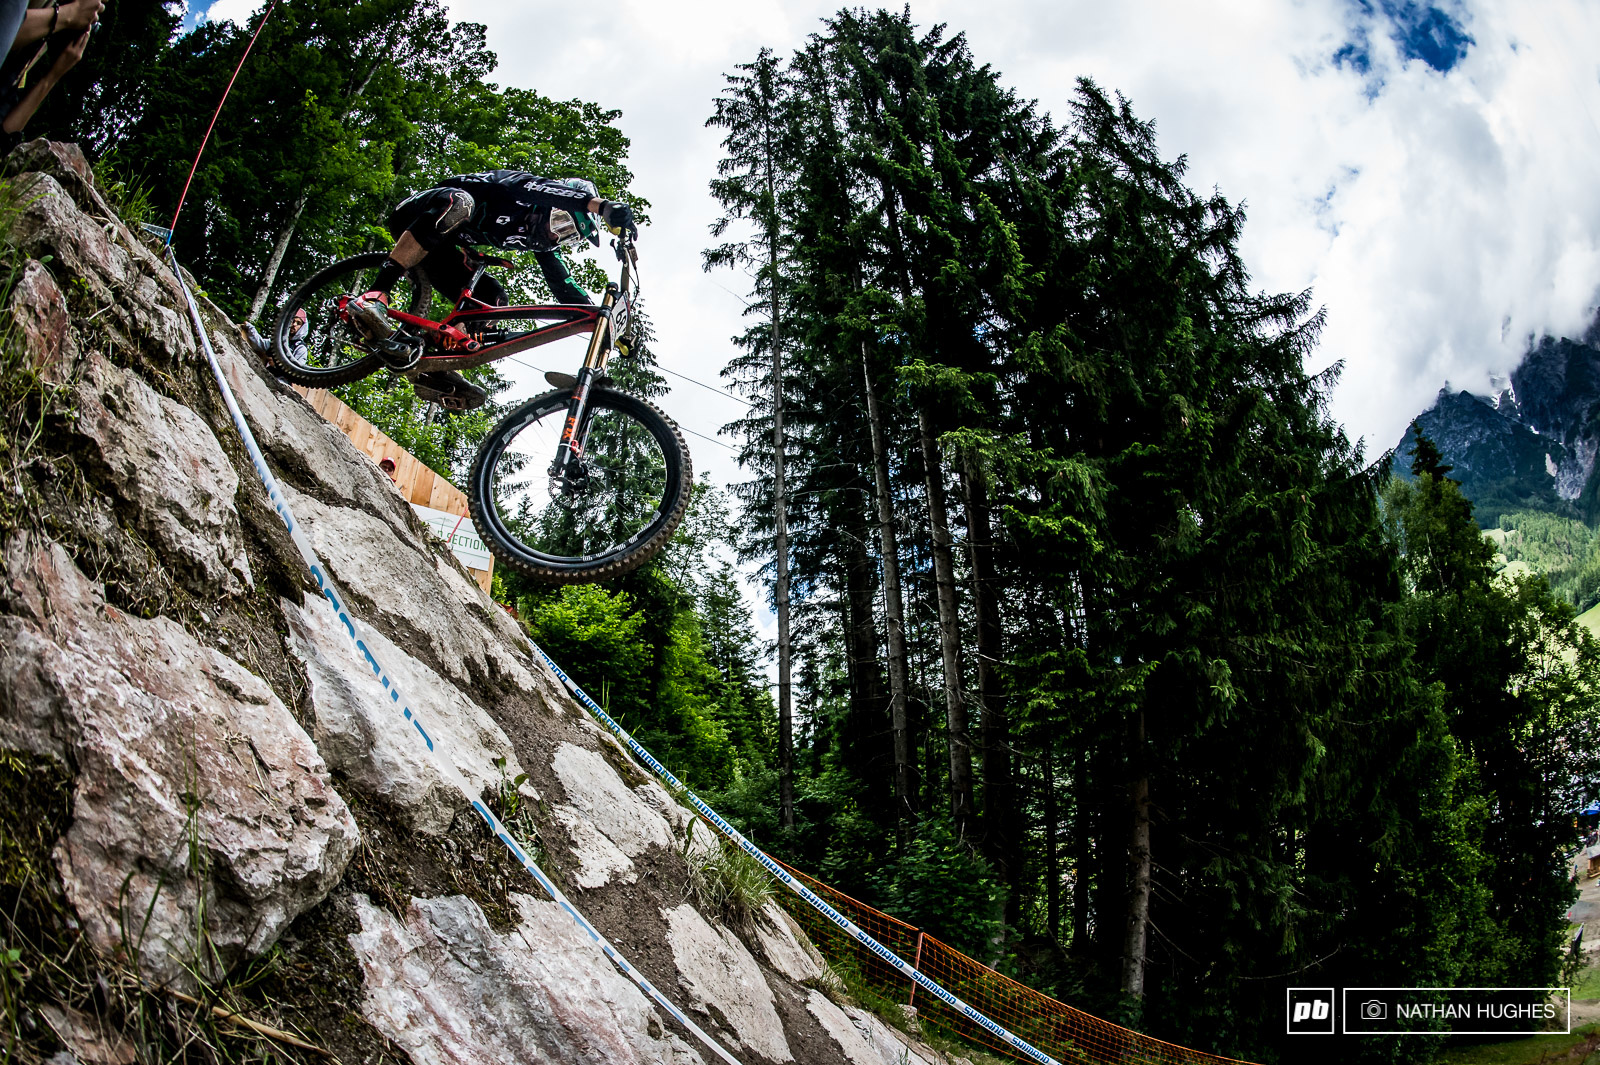 In for the Kill Finals - Leogang DH World Cup 2016